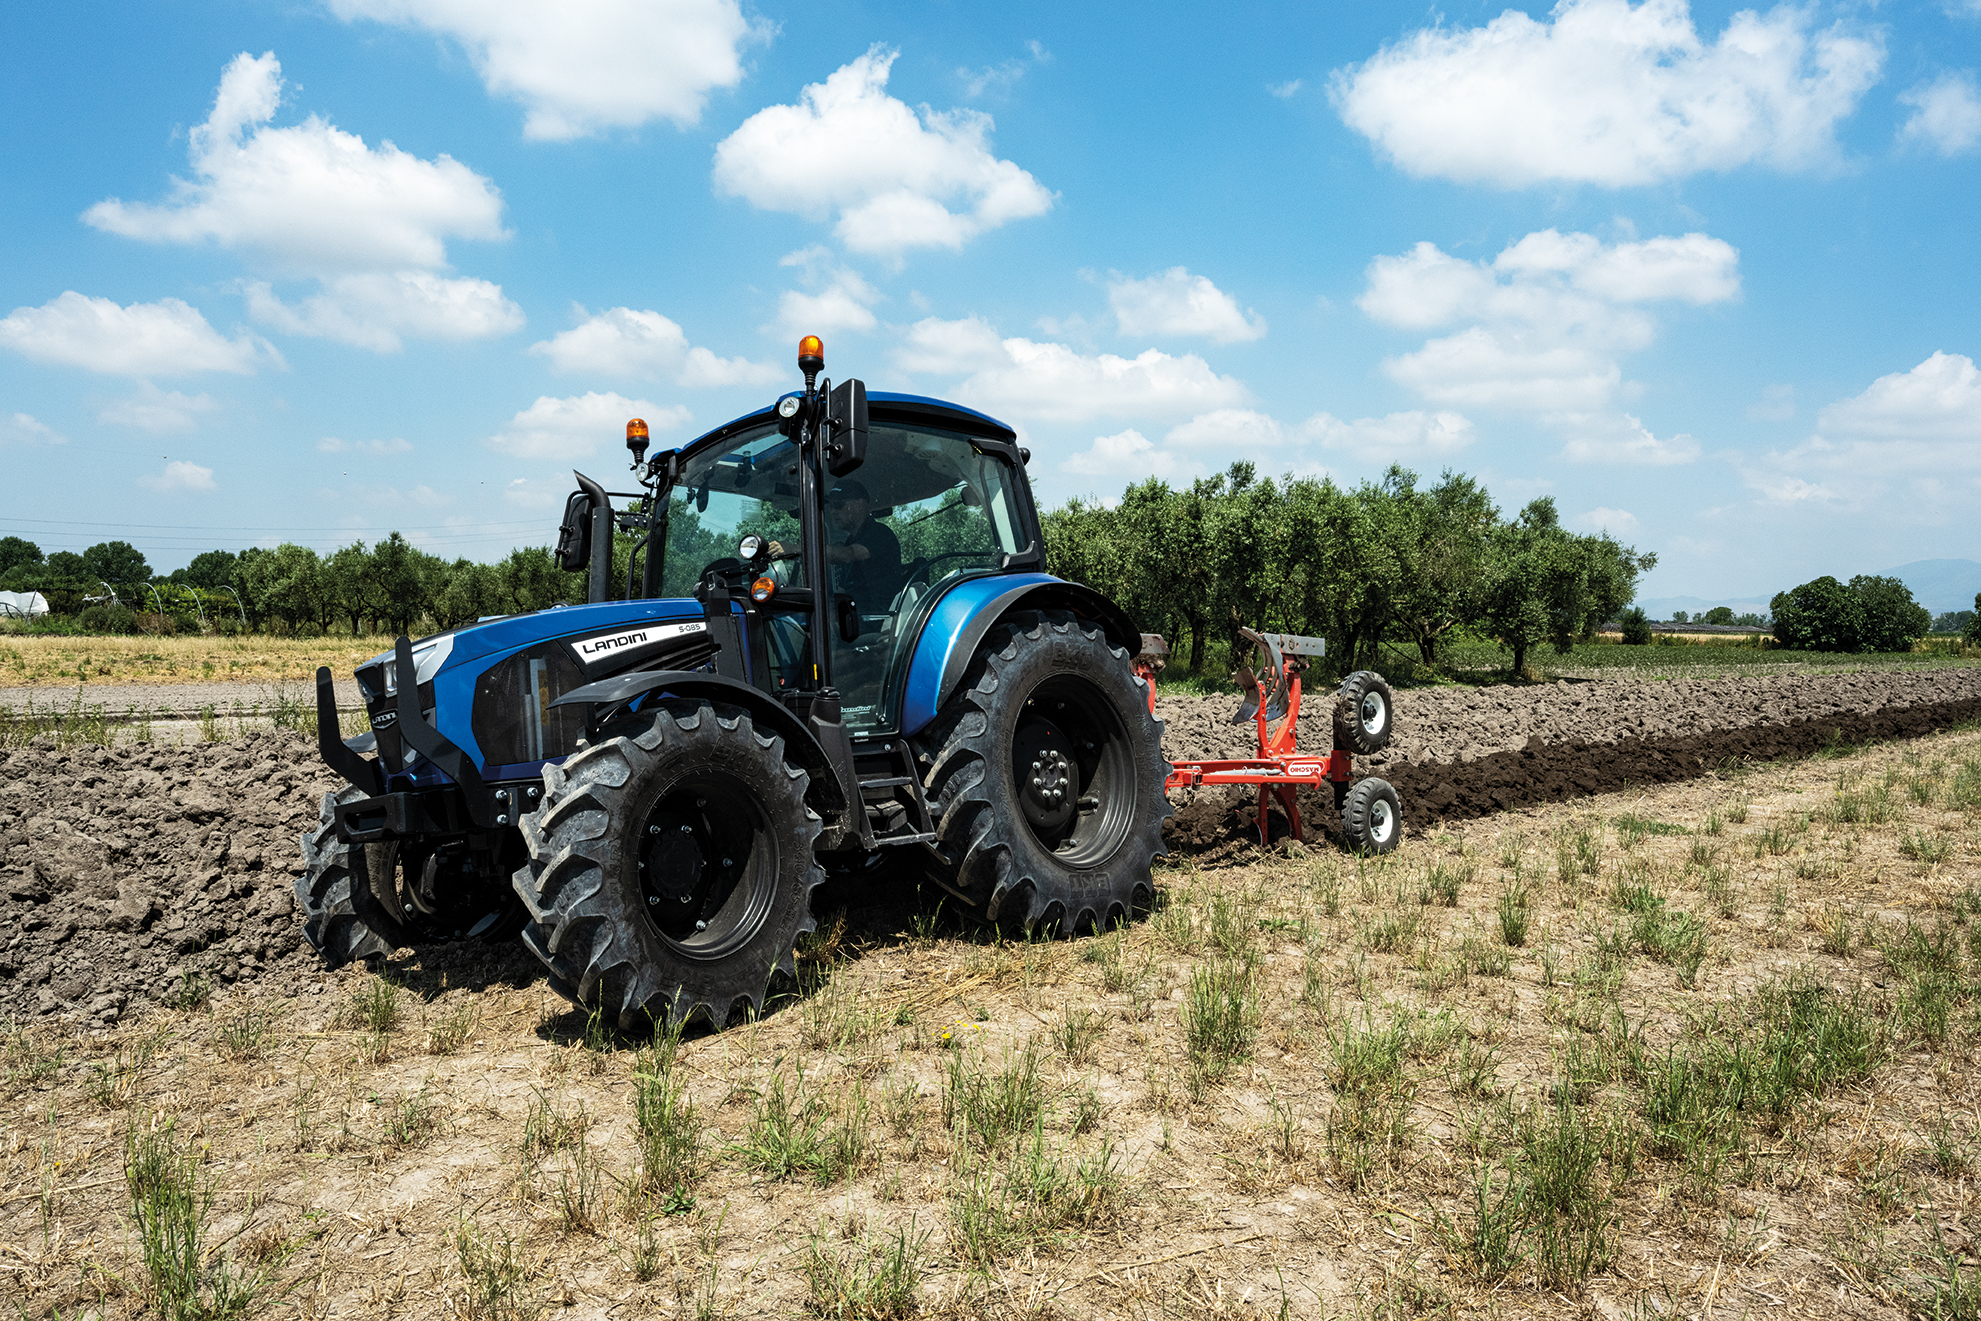 2022 starts with Landini’s new products